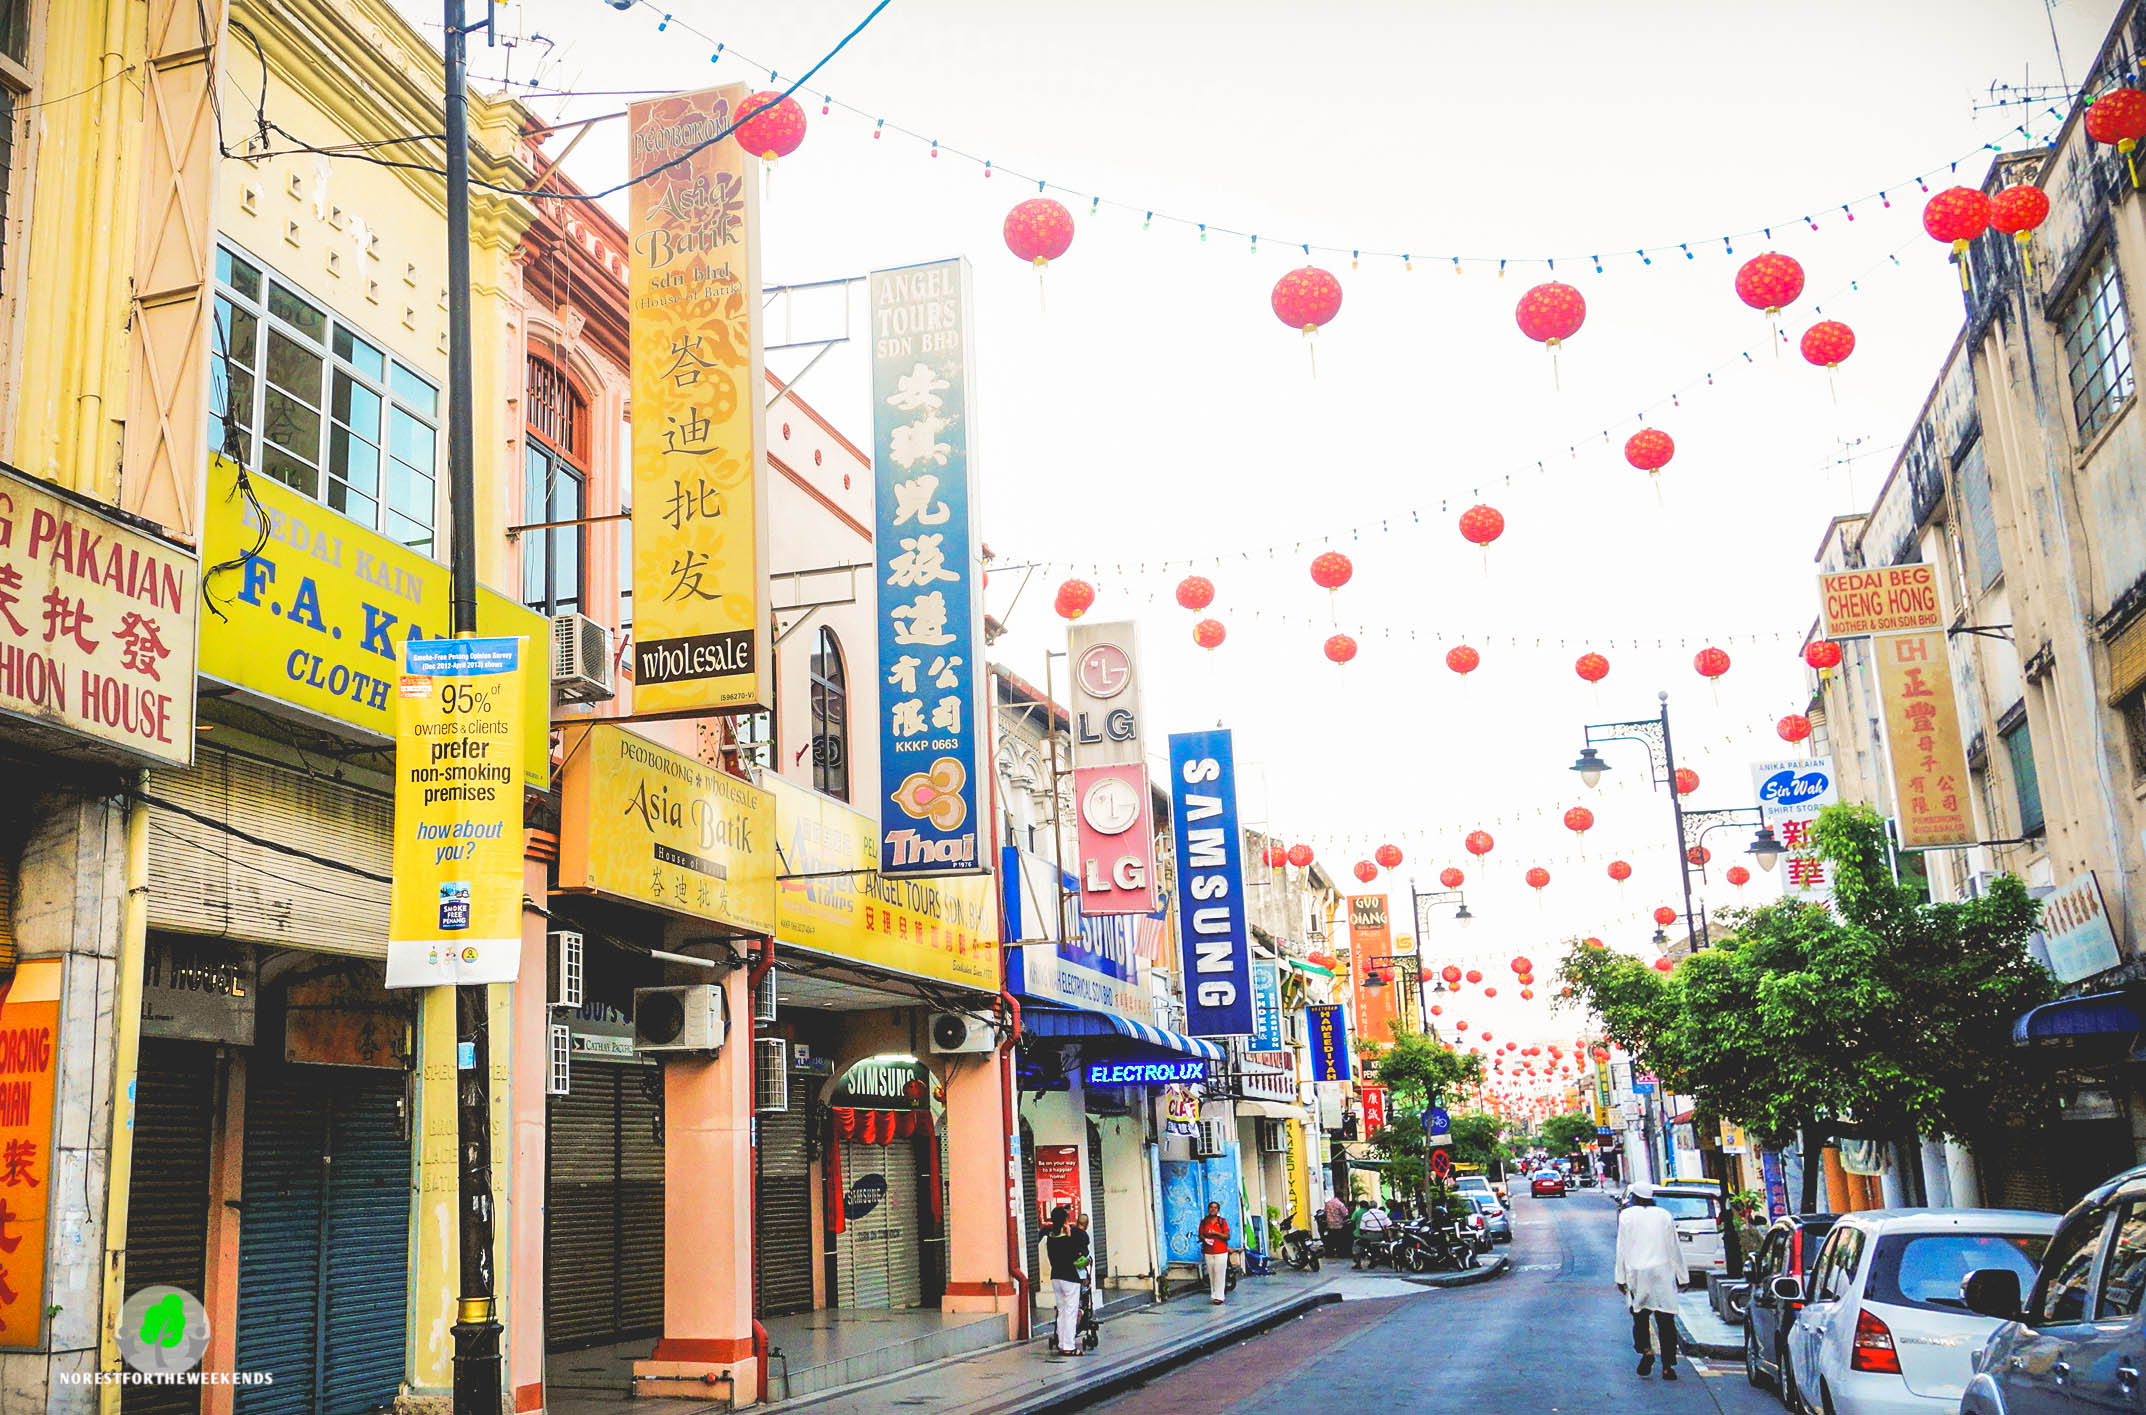 #LonelyPlanet: George Town Ranked 4th Most Charismatic City To Visit In